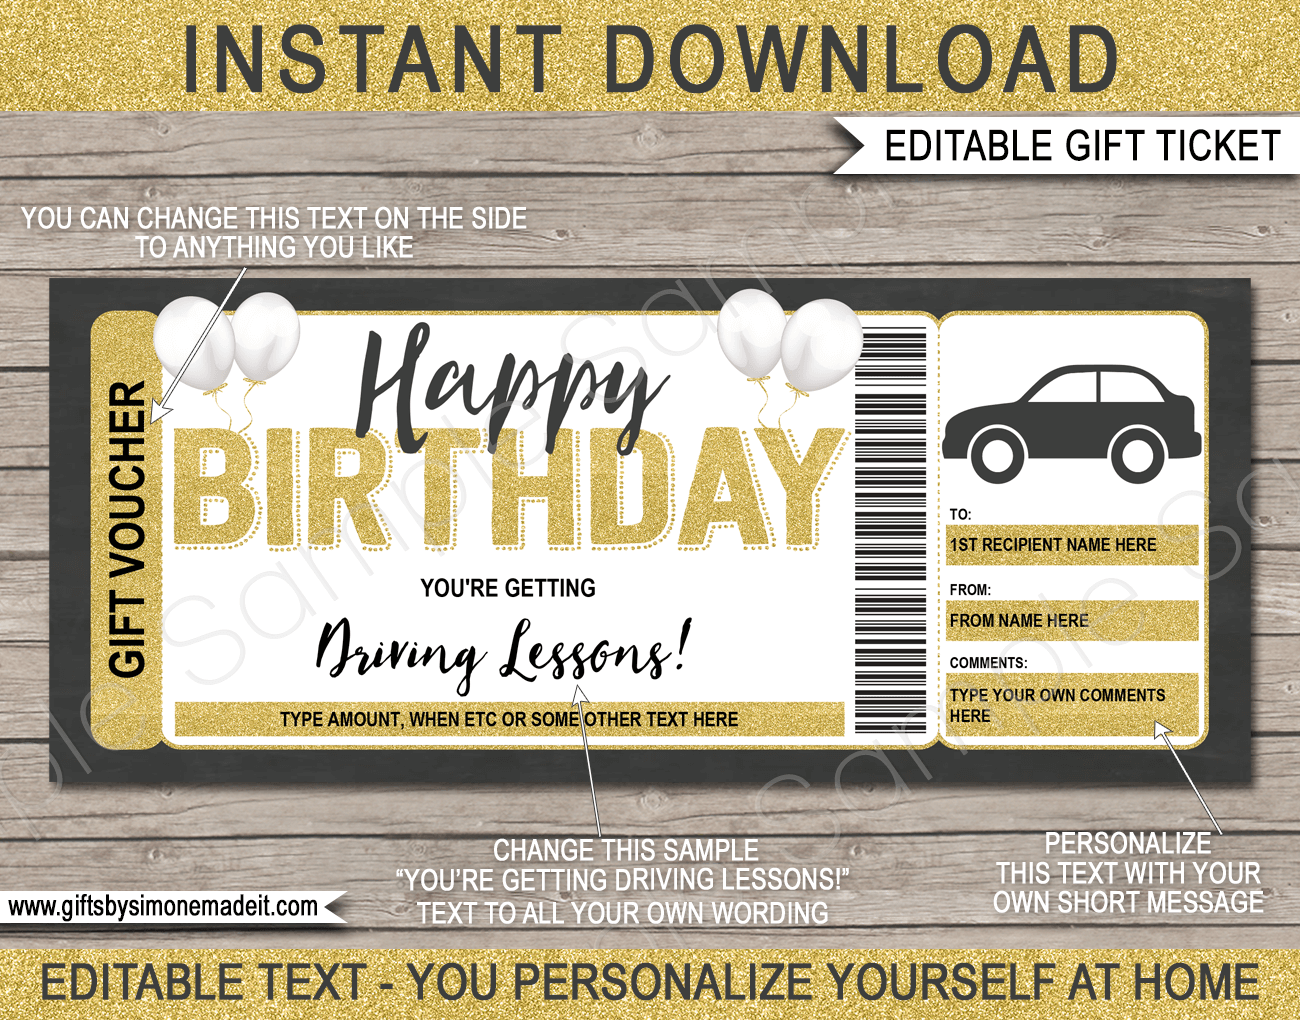 Free Printable Gift Voucher Template For Driving Lessons